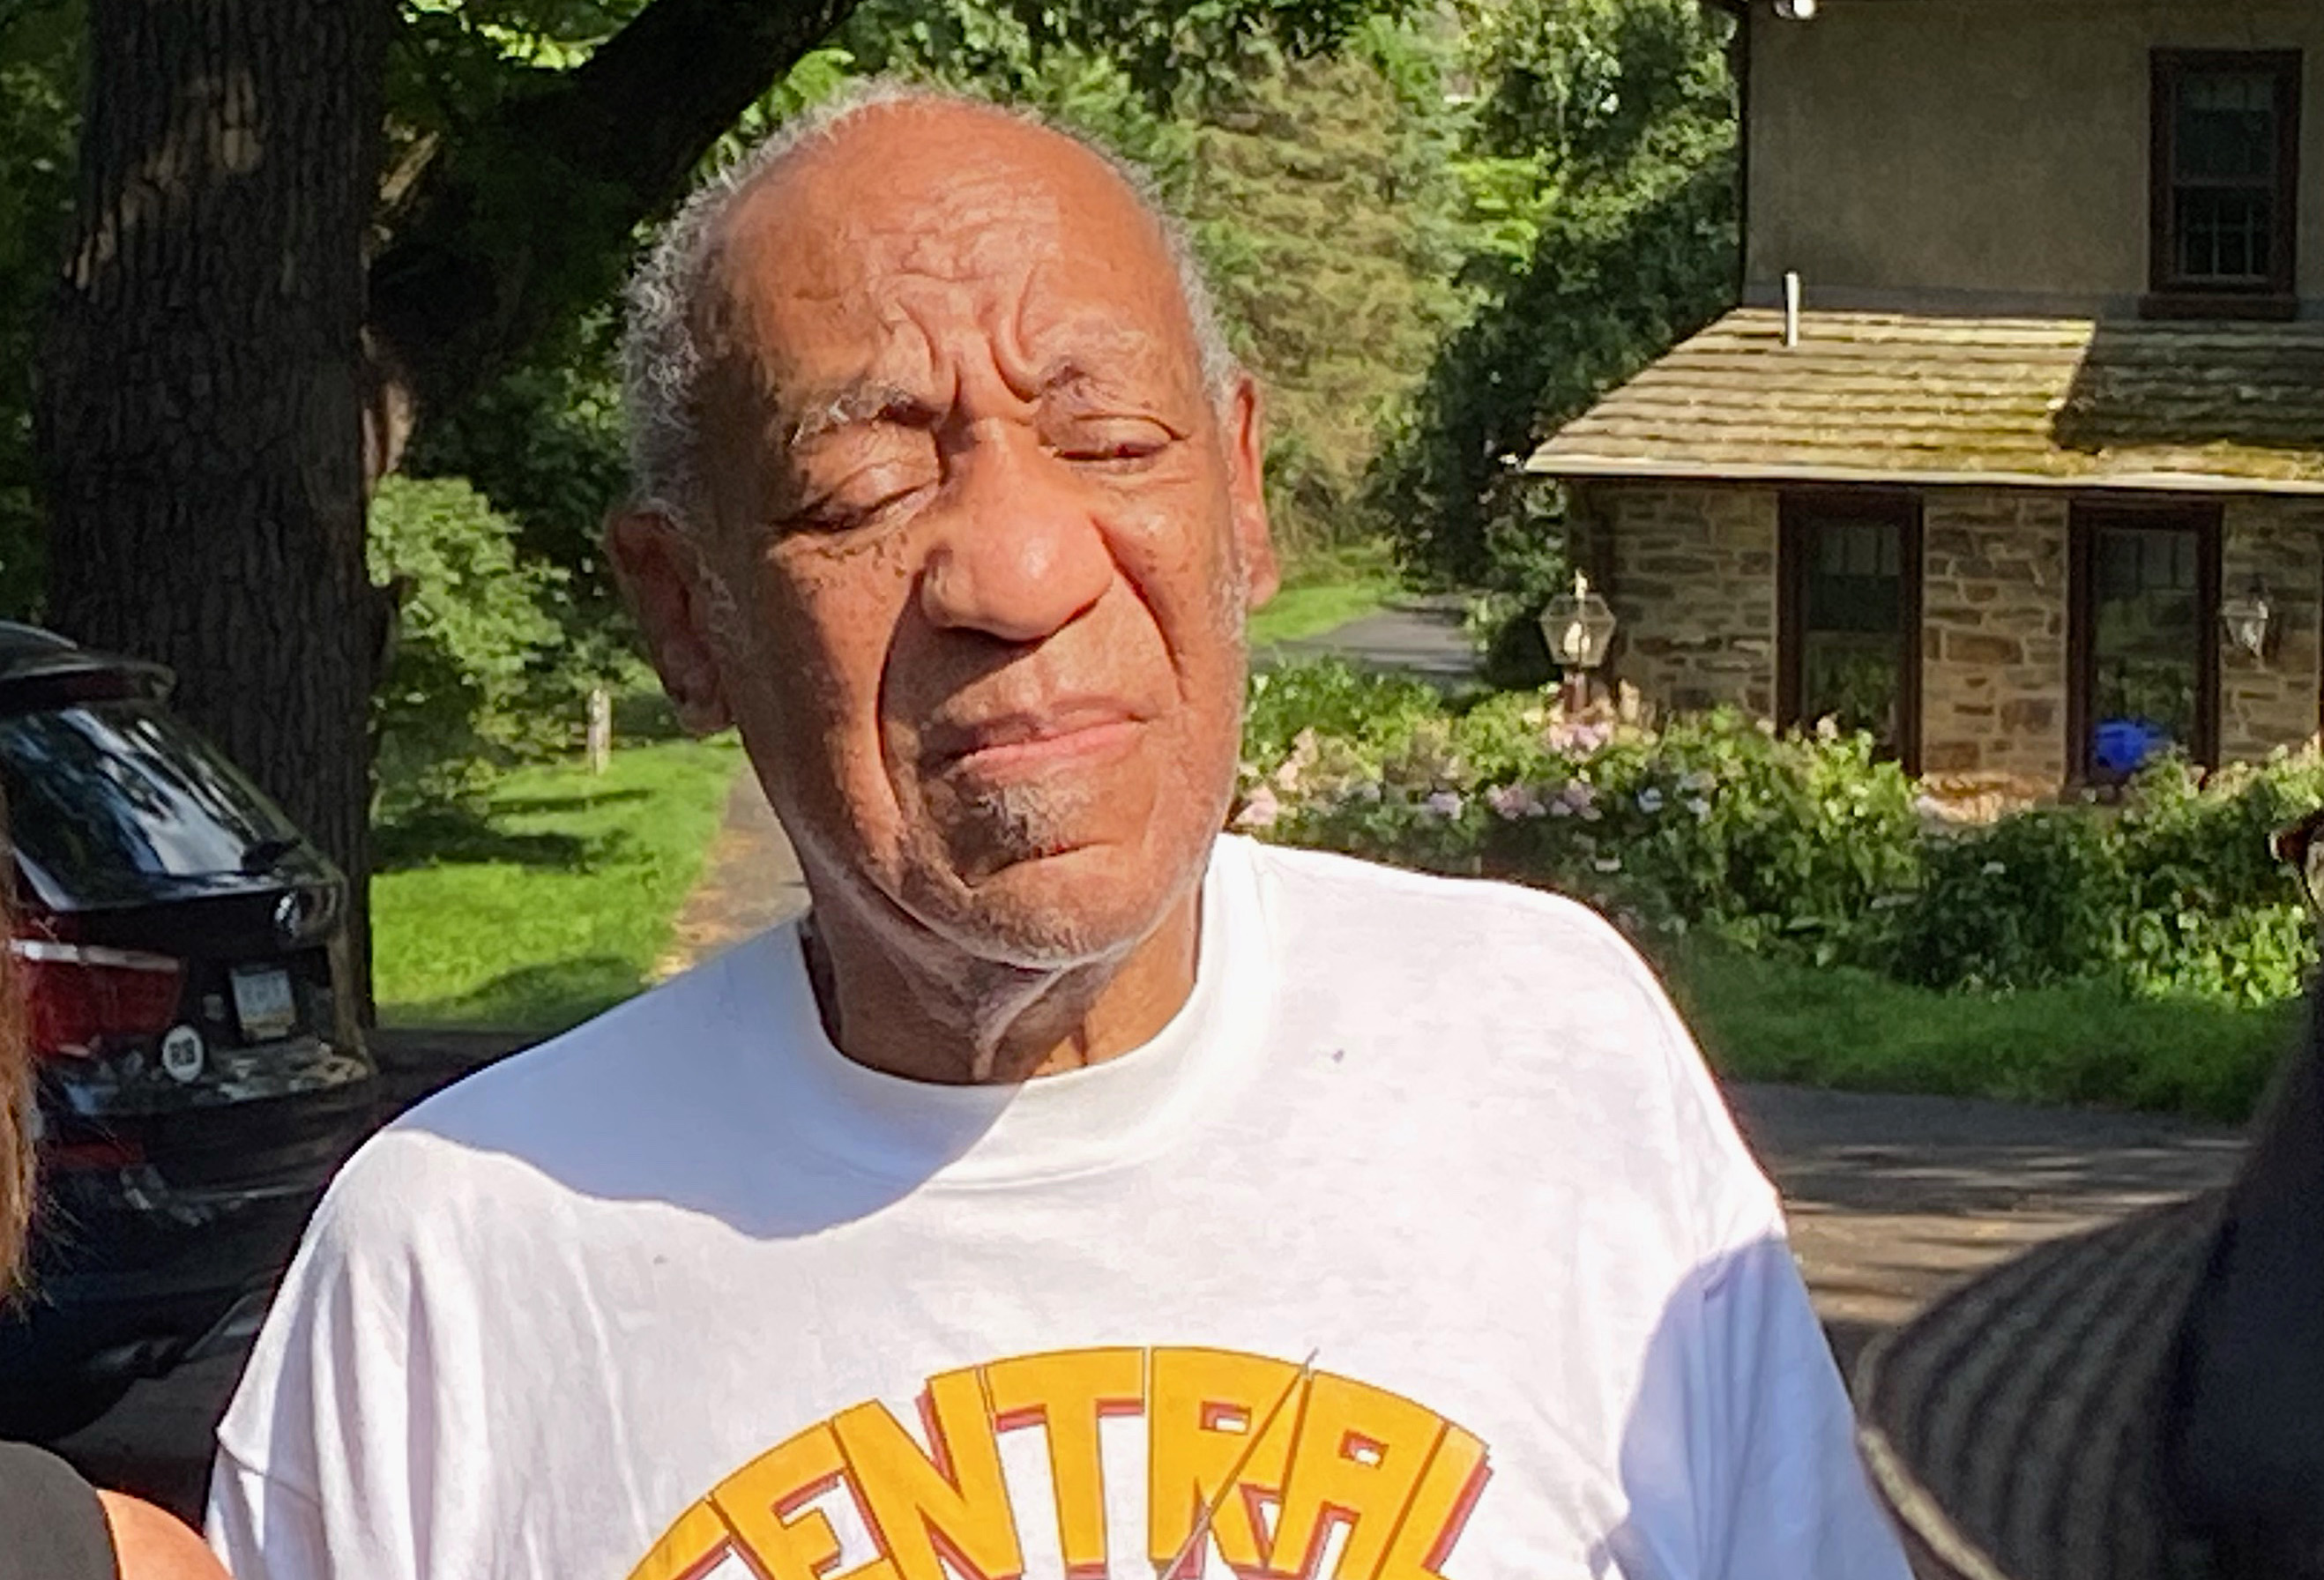 Bill Cosby speaks to reporters outside of his home on June 30, 2021 in Cheltenham, Pennsylvania. | Source: Getty Images